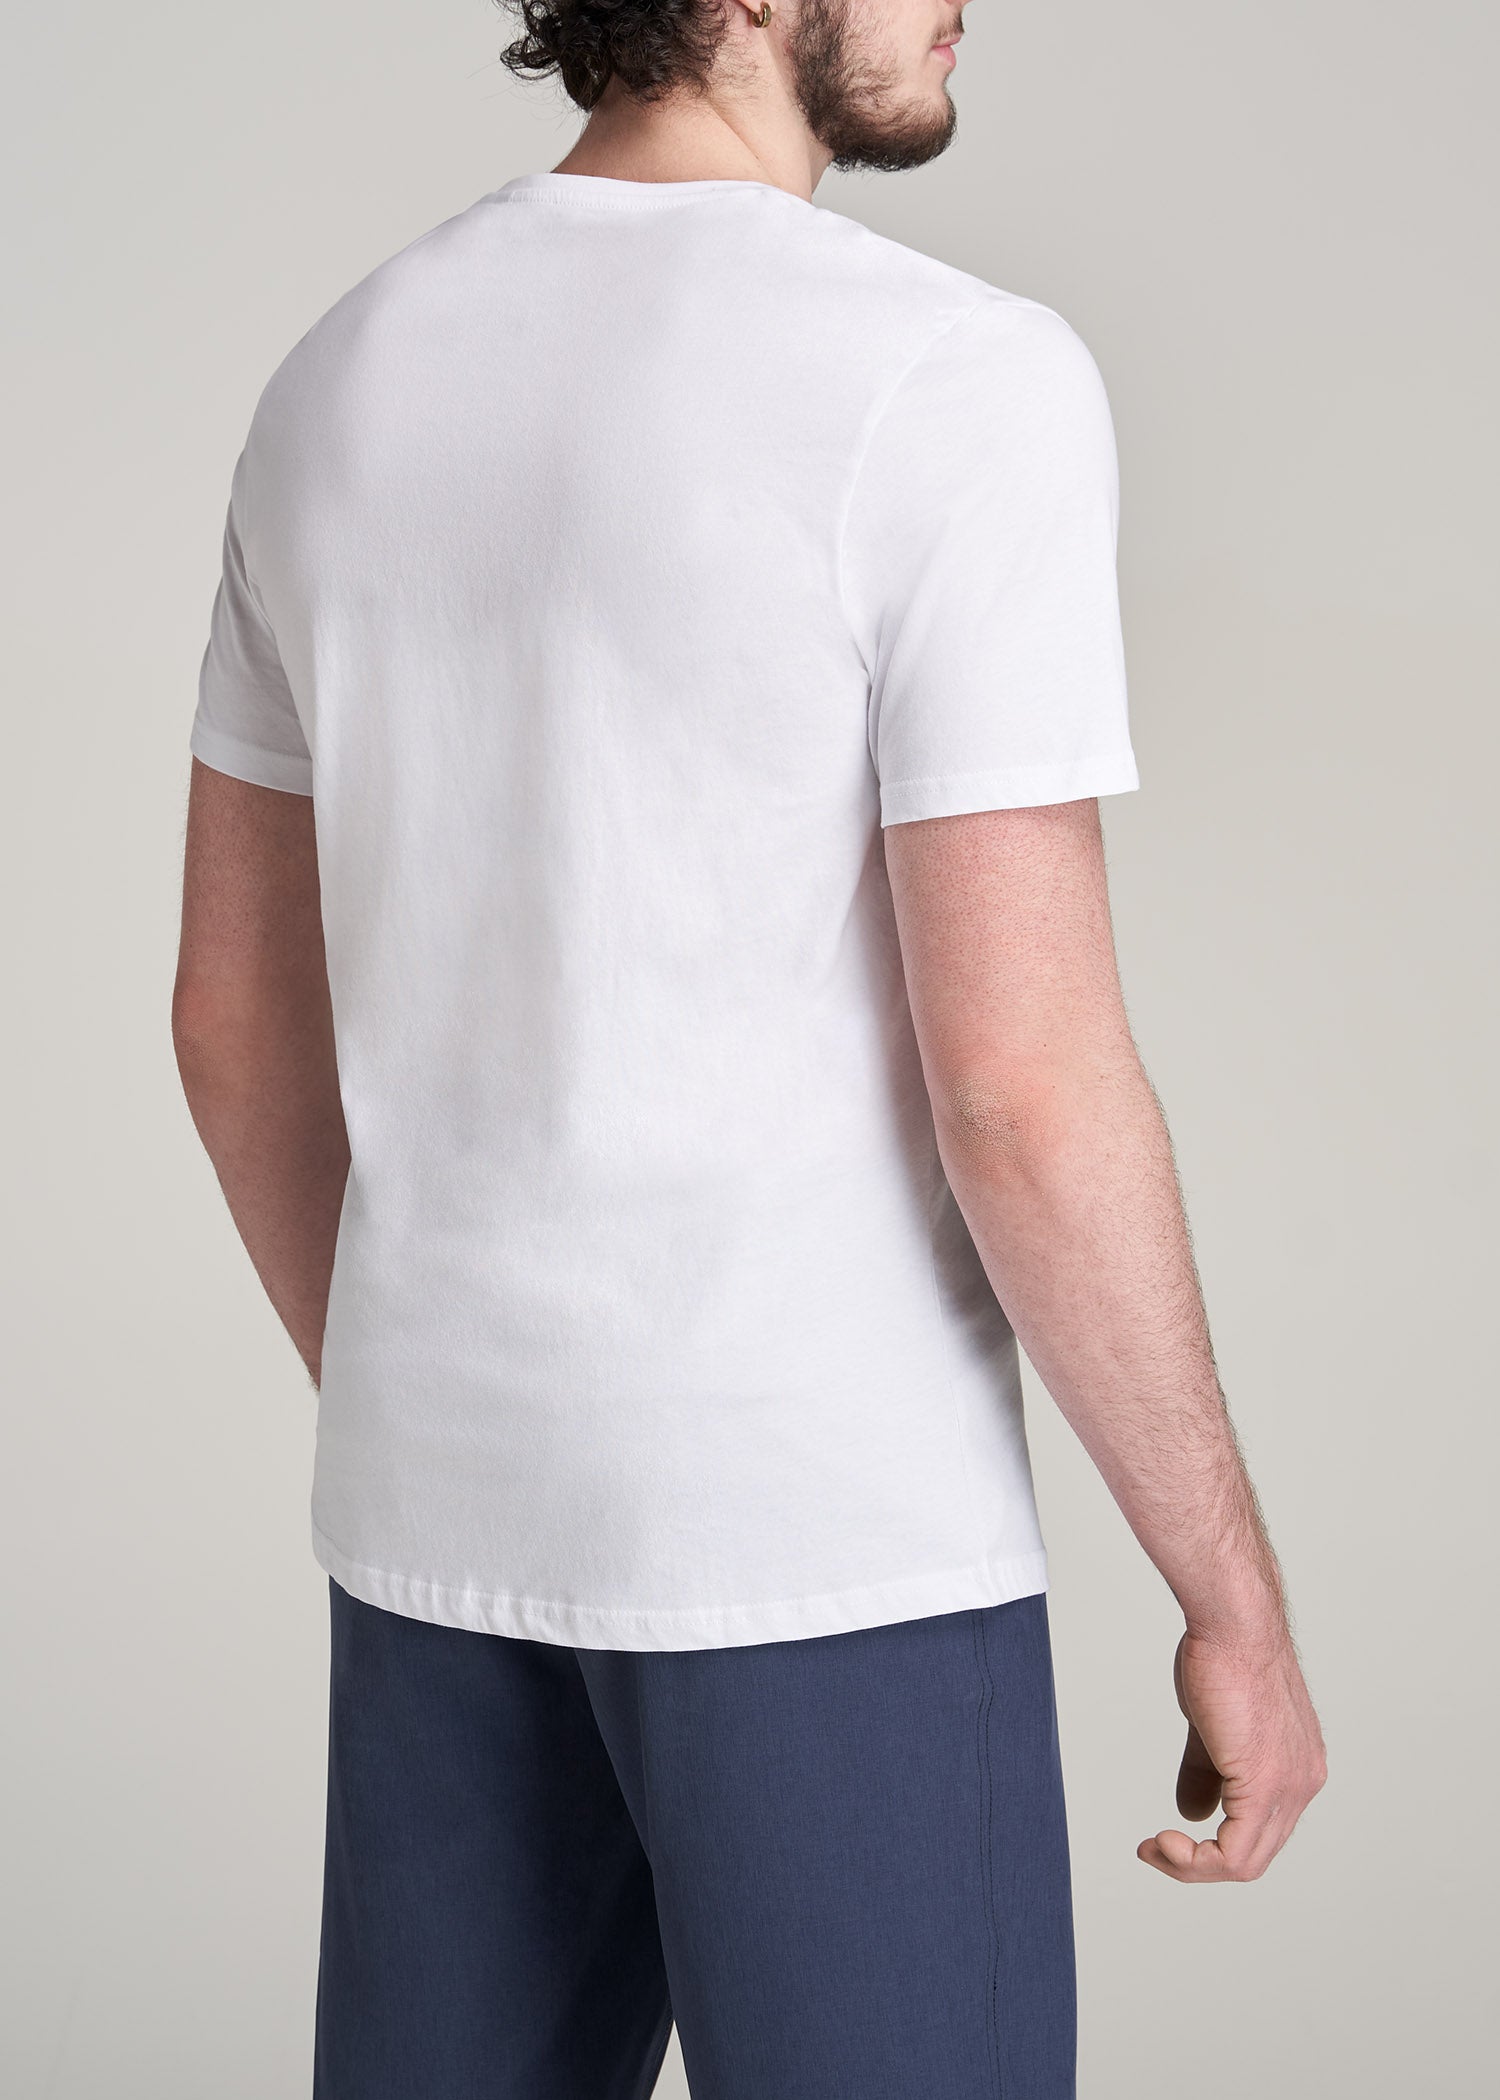 American Fit T-shirt: Men's Tall Pocket White Tee